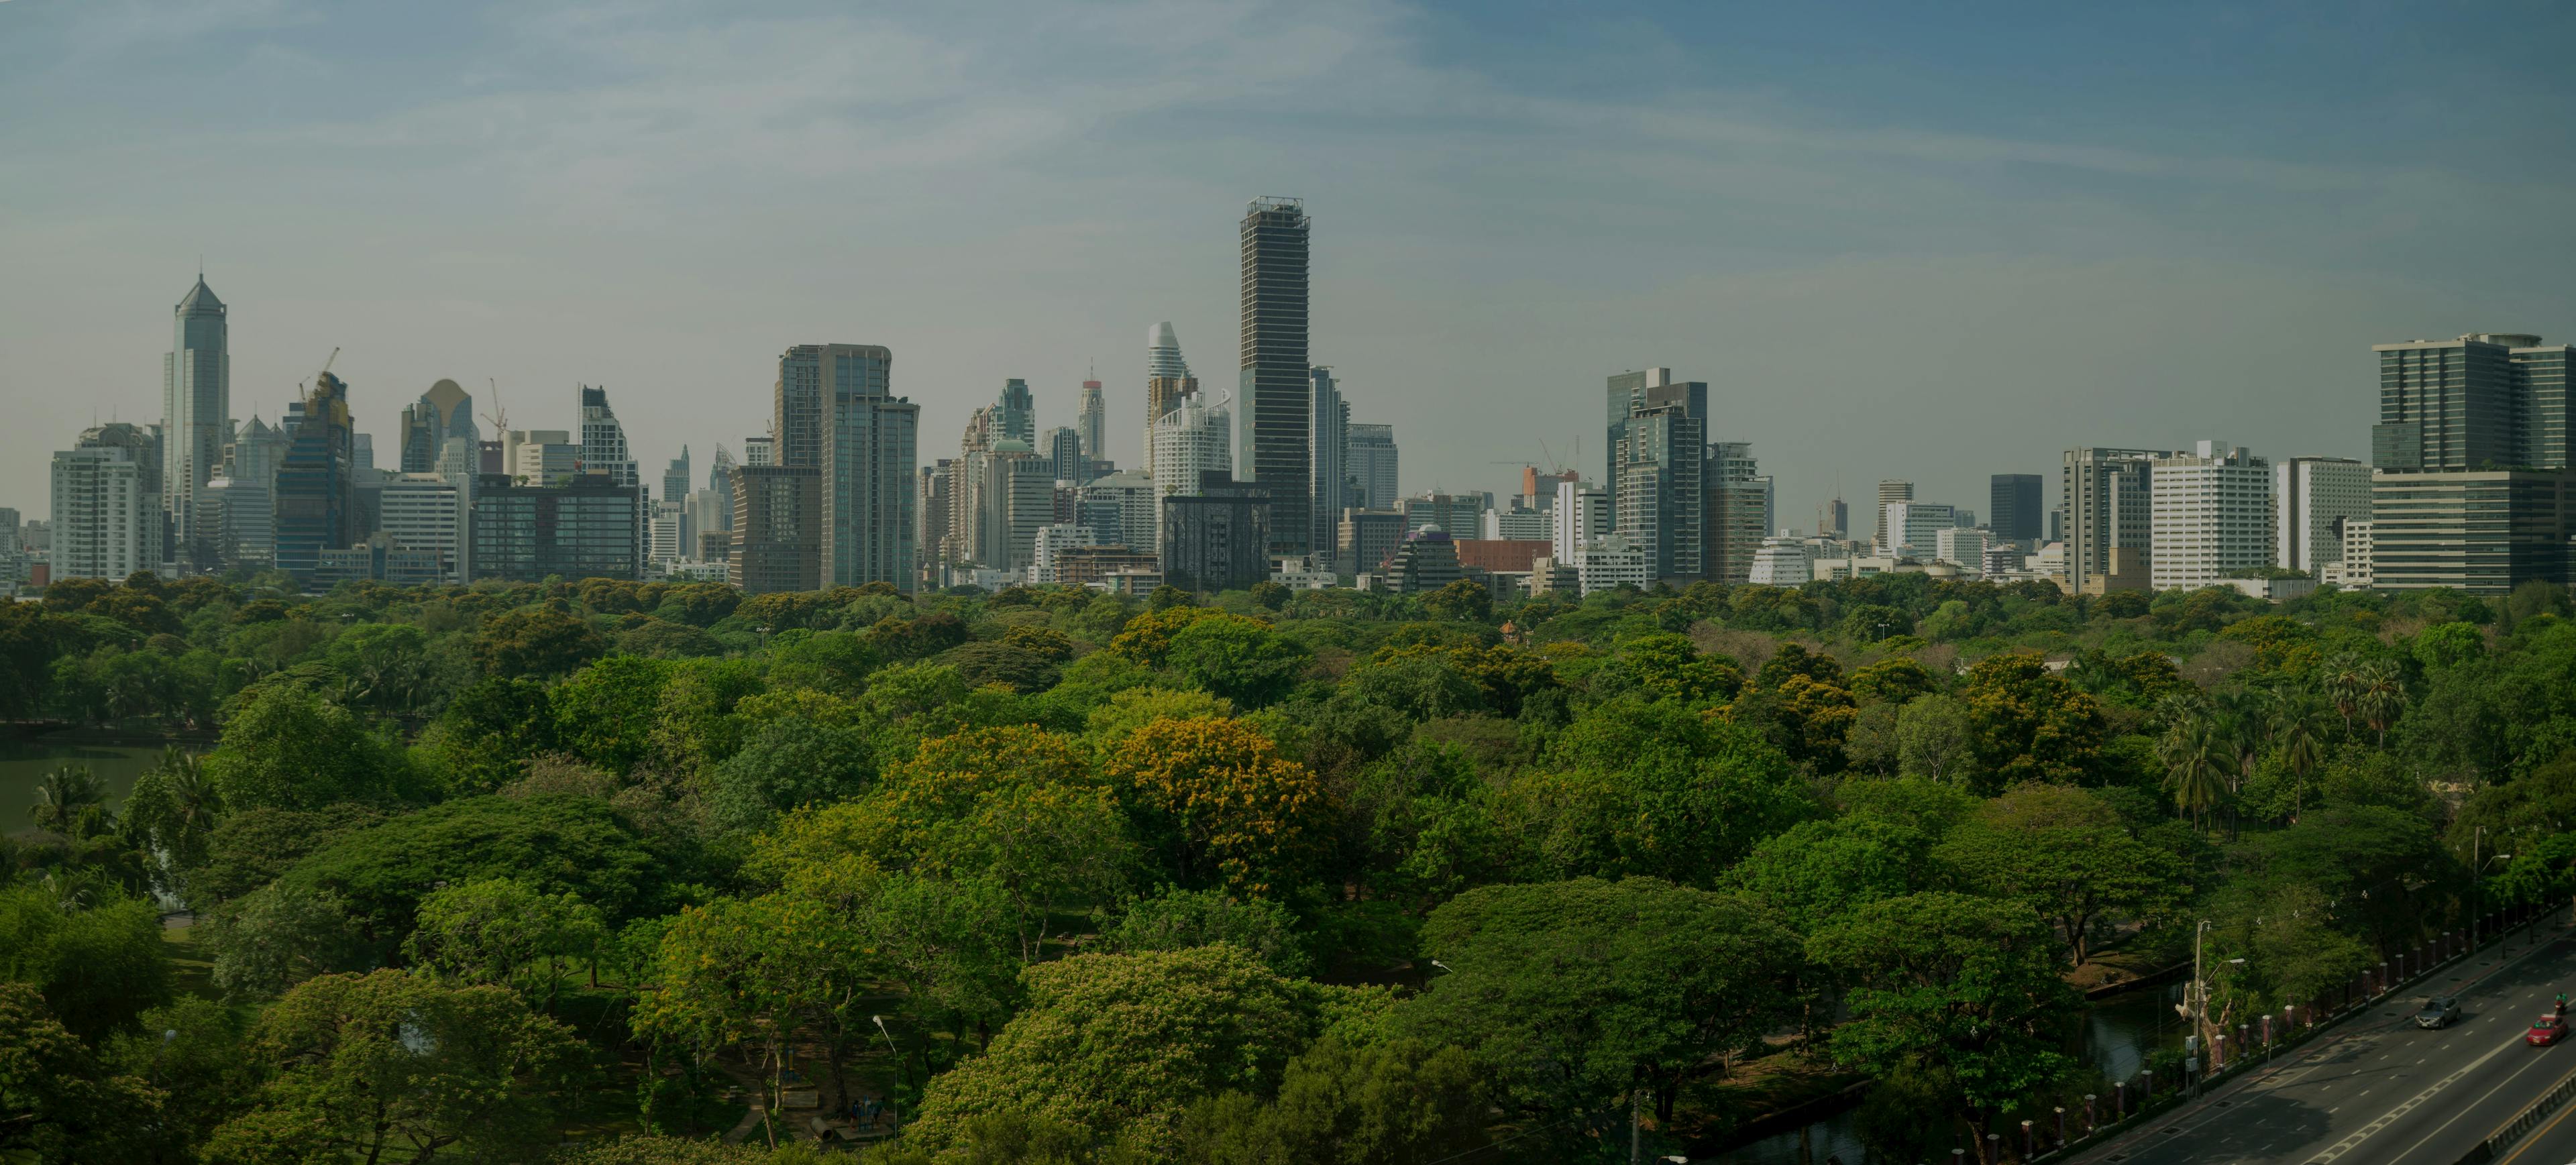 Image of a city skyline in the background, trees in a park in the forefront